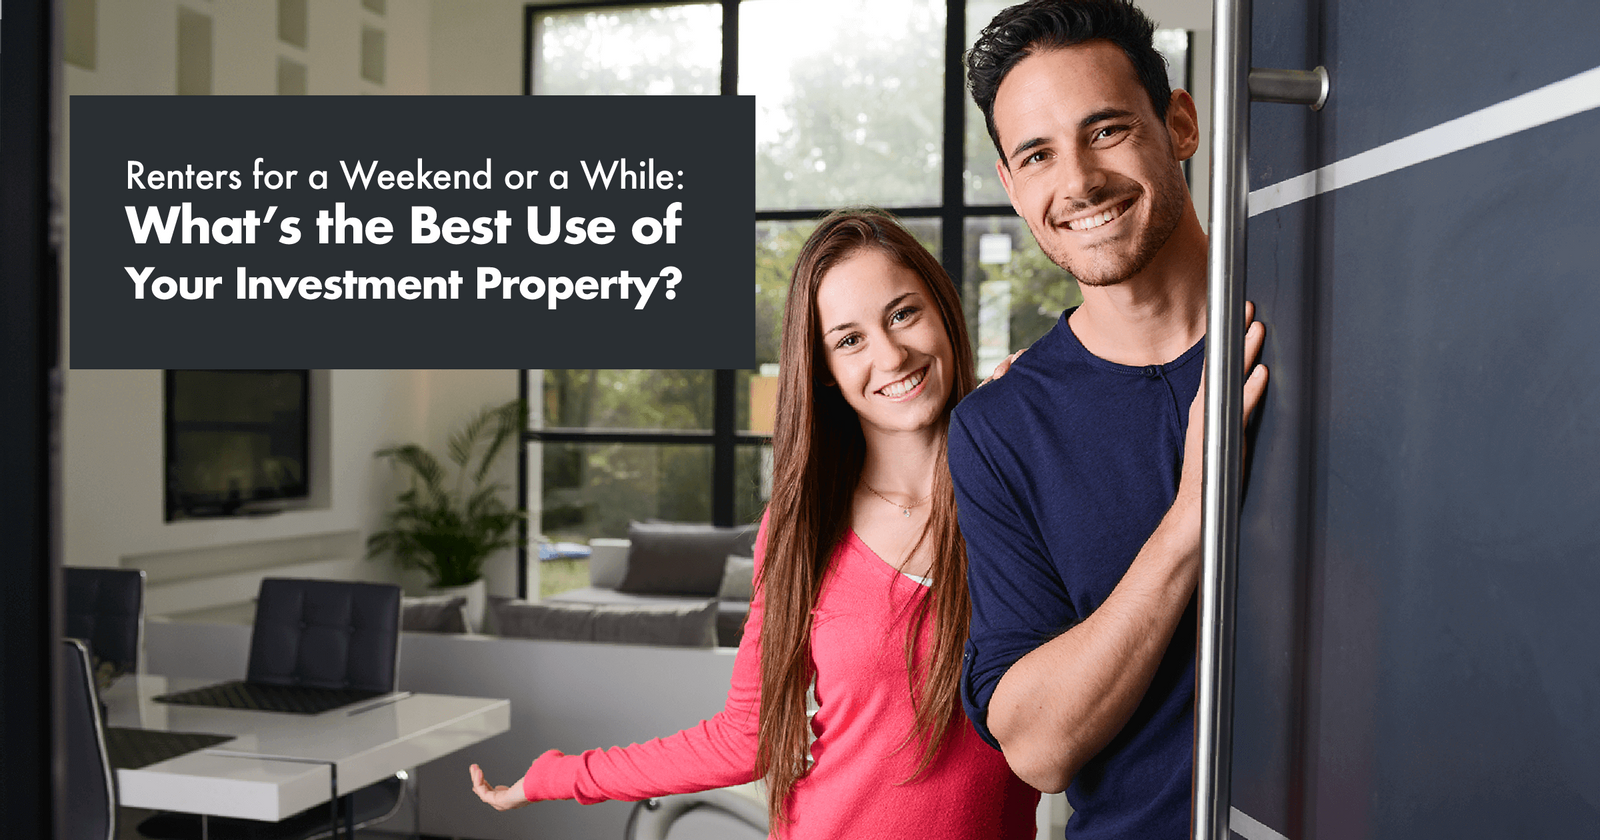 Renters for a Weekend or a While: What’s the Best Use of Your Investment Property?